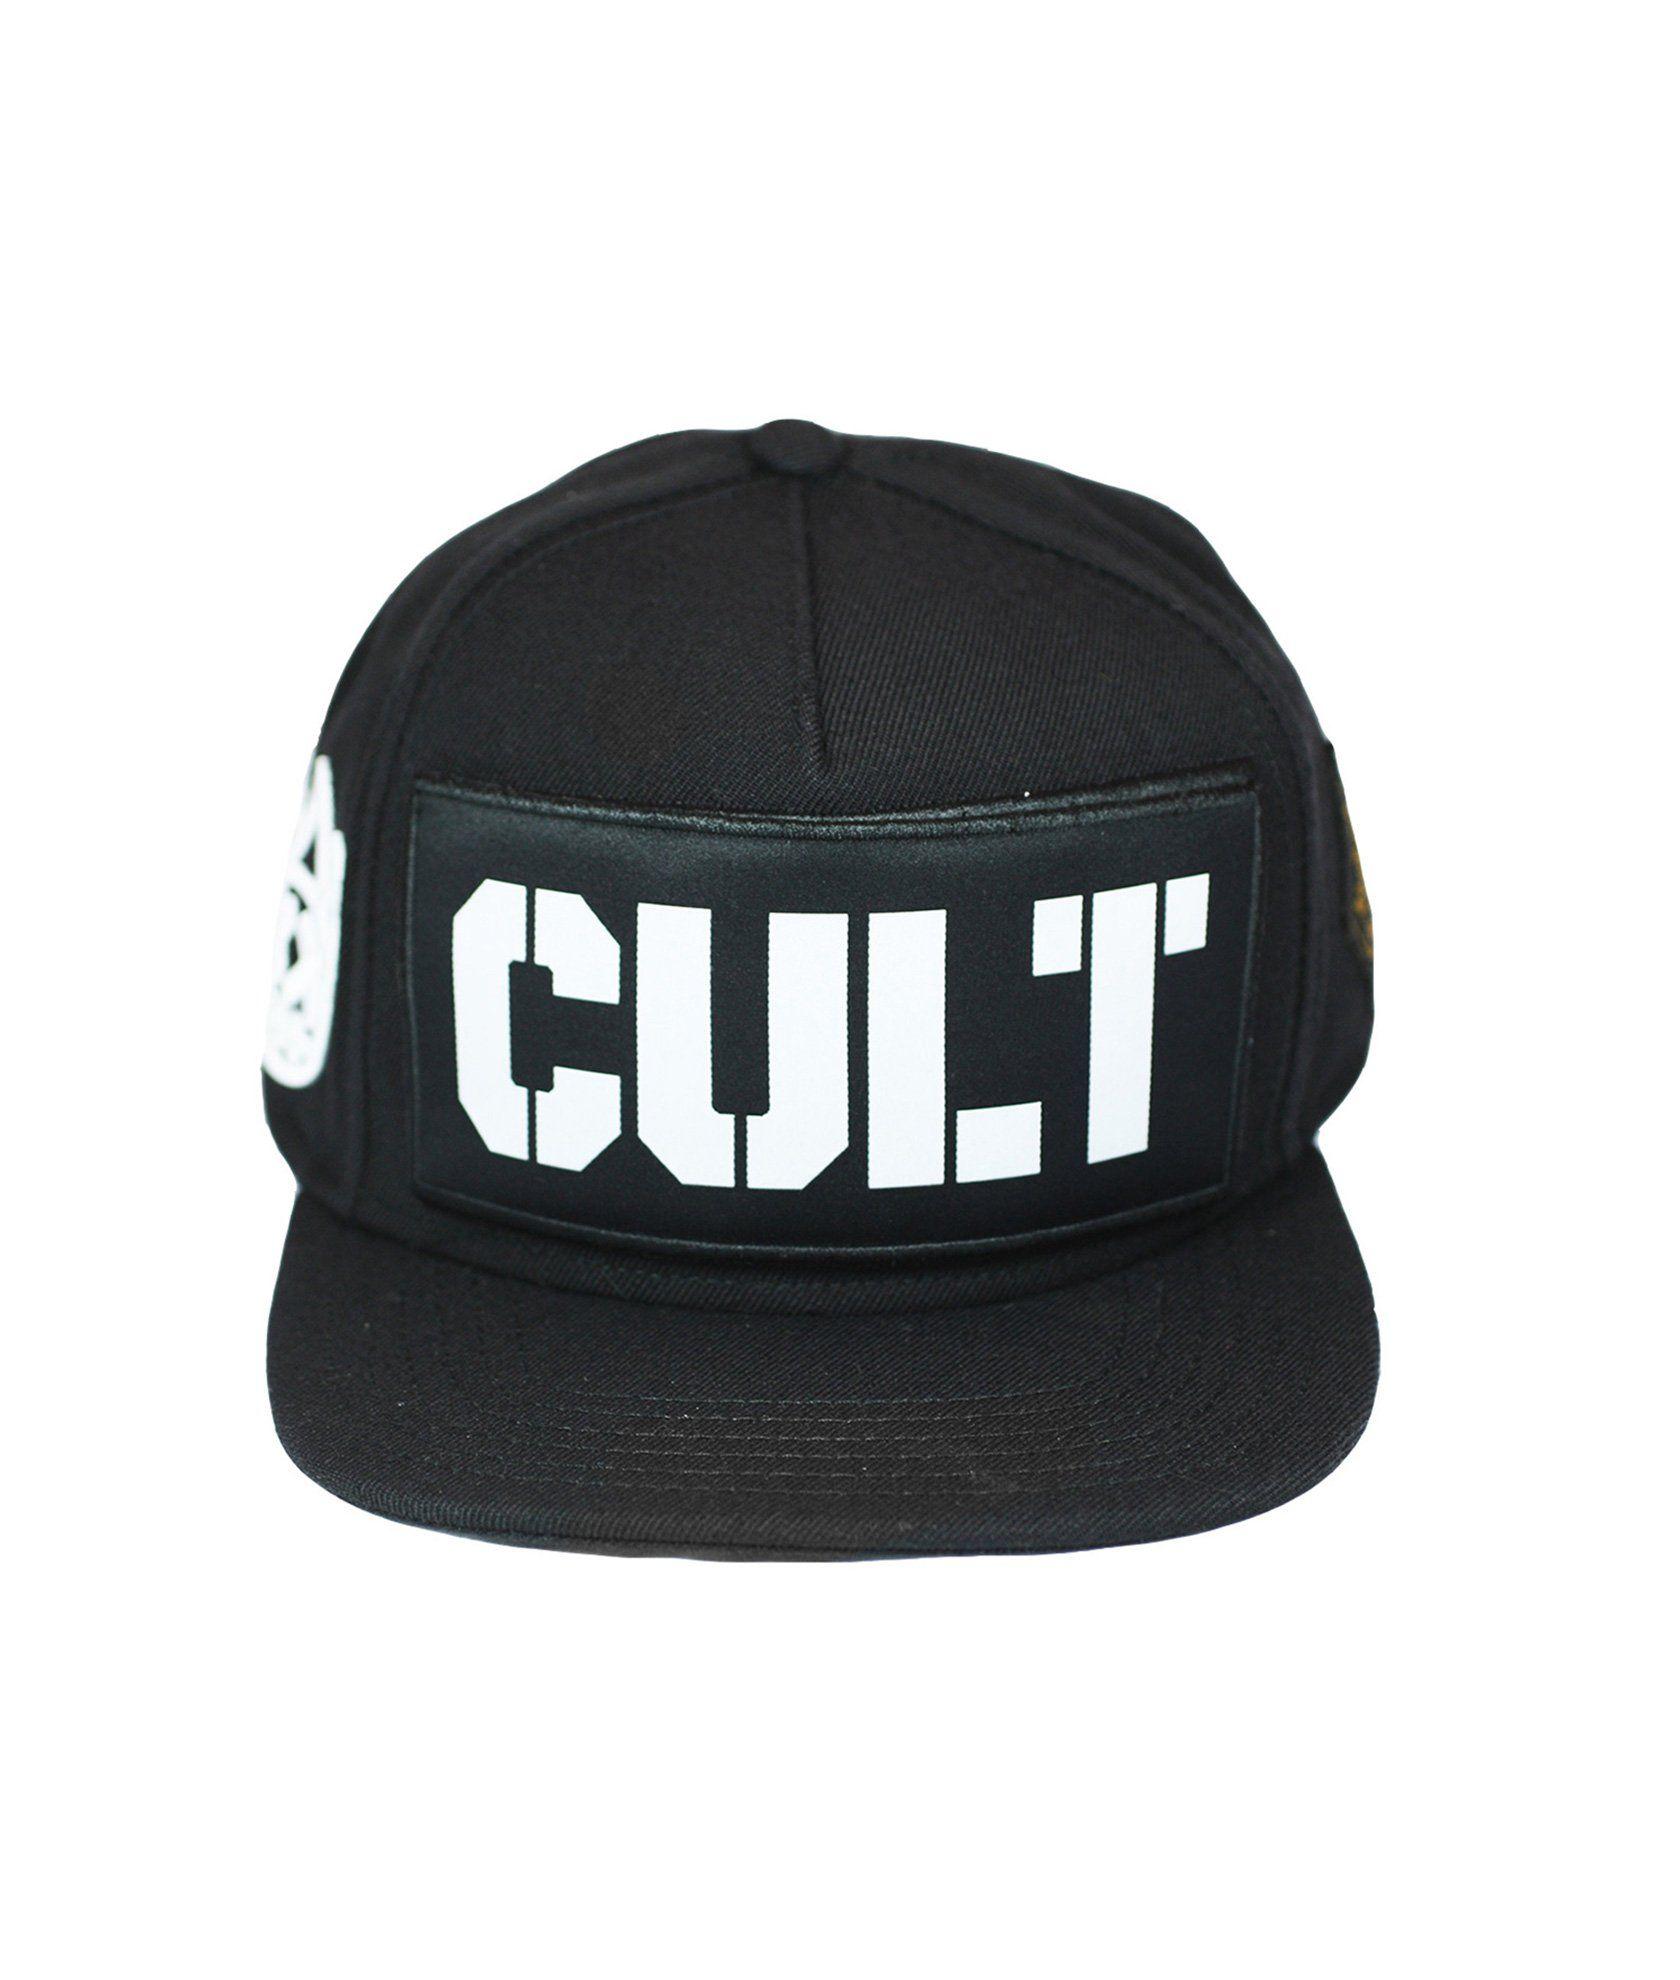 Velcro Logo - Cult of IndividualityCult Black Hat EPIC Velcro Logo 5-Panel